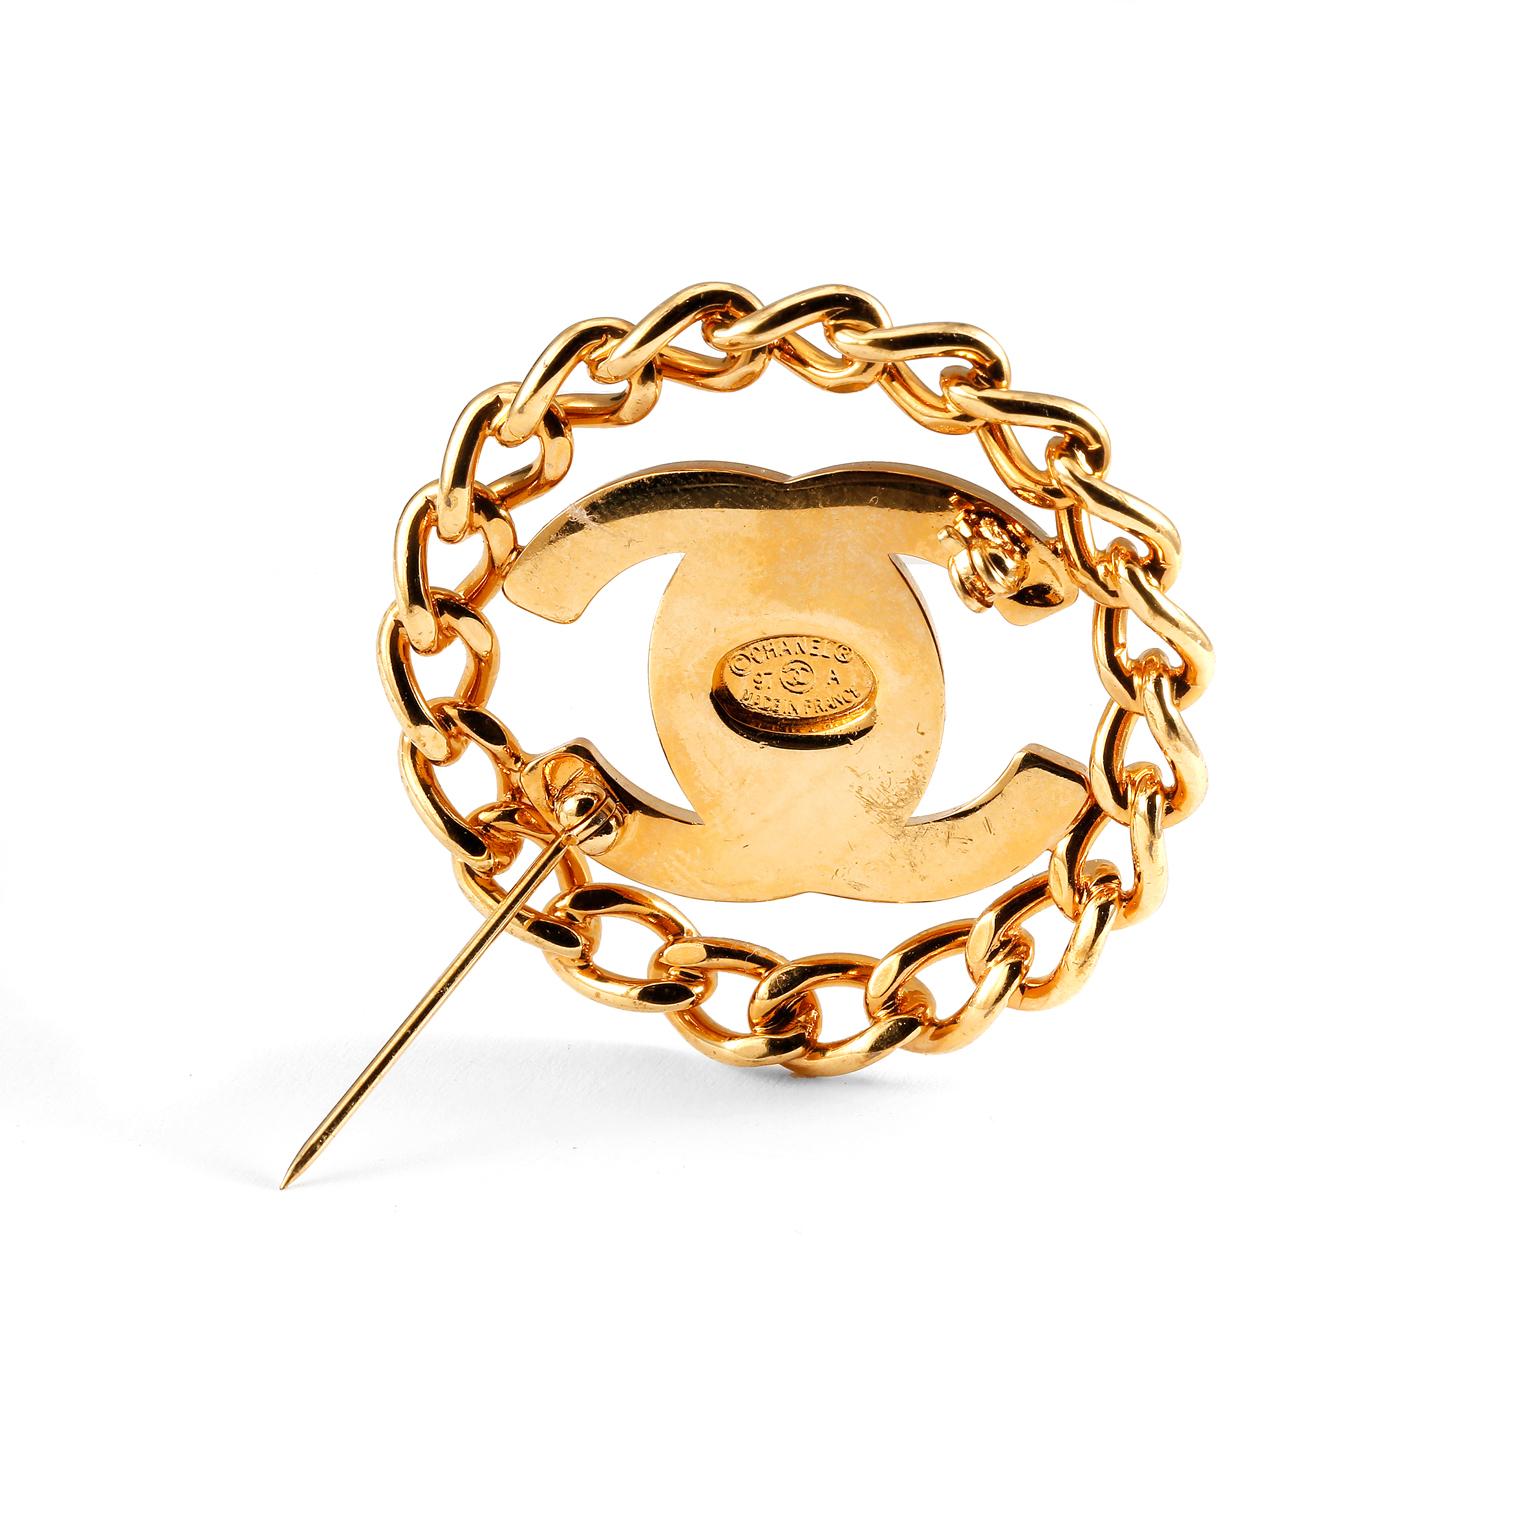 These authentic Chanel Gold CC Clasp with Chain Surround Pin is in very good condition from the Fall 1997 collection.  Gold tone interlocking CC “twist lock” clasp is centered within a circular linked chain.  Made in France.

Approximately 3.5 cm